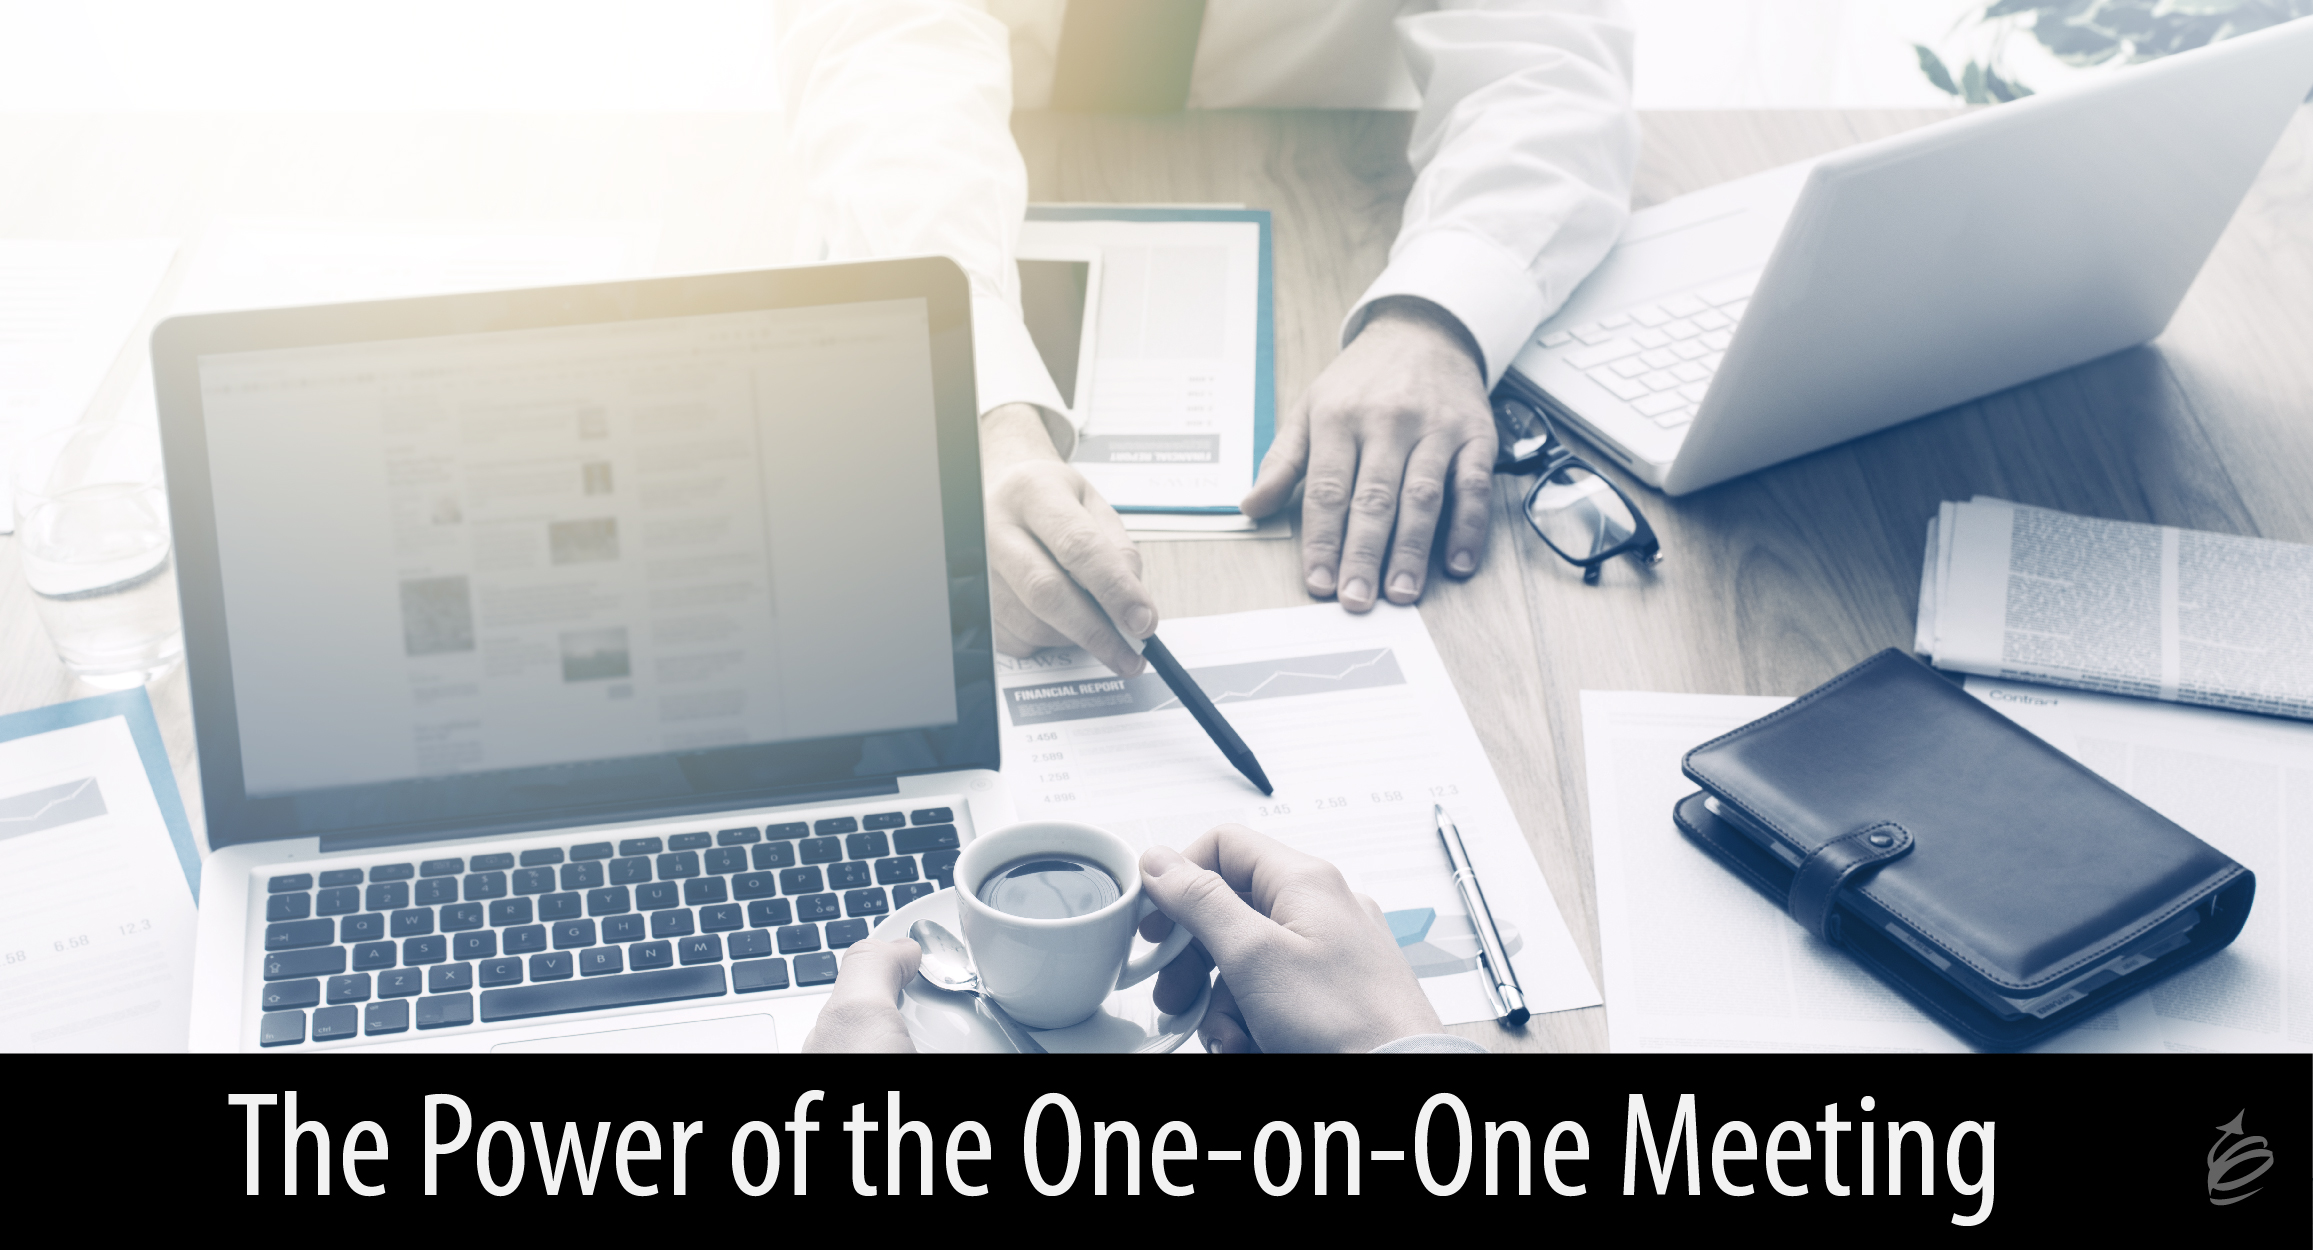 One-on-one meetings are critical